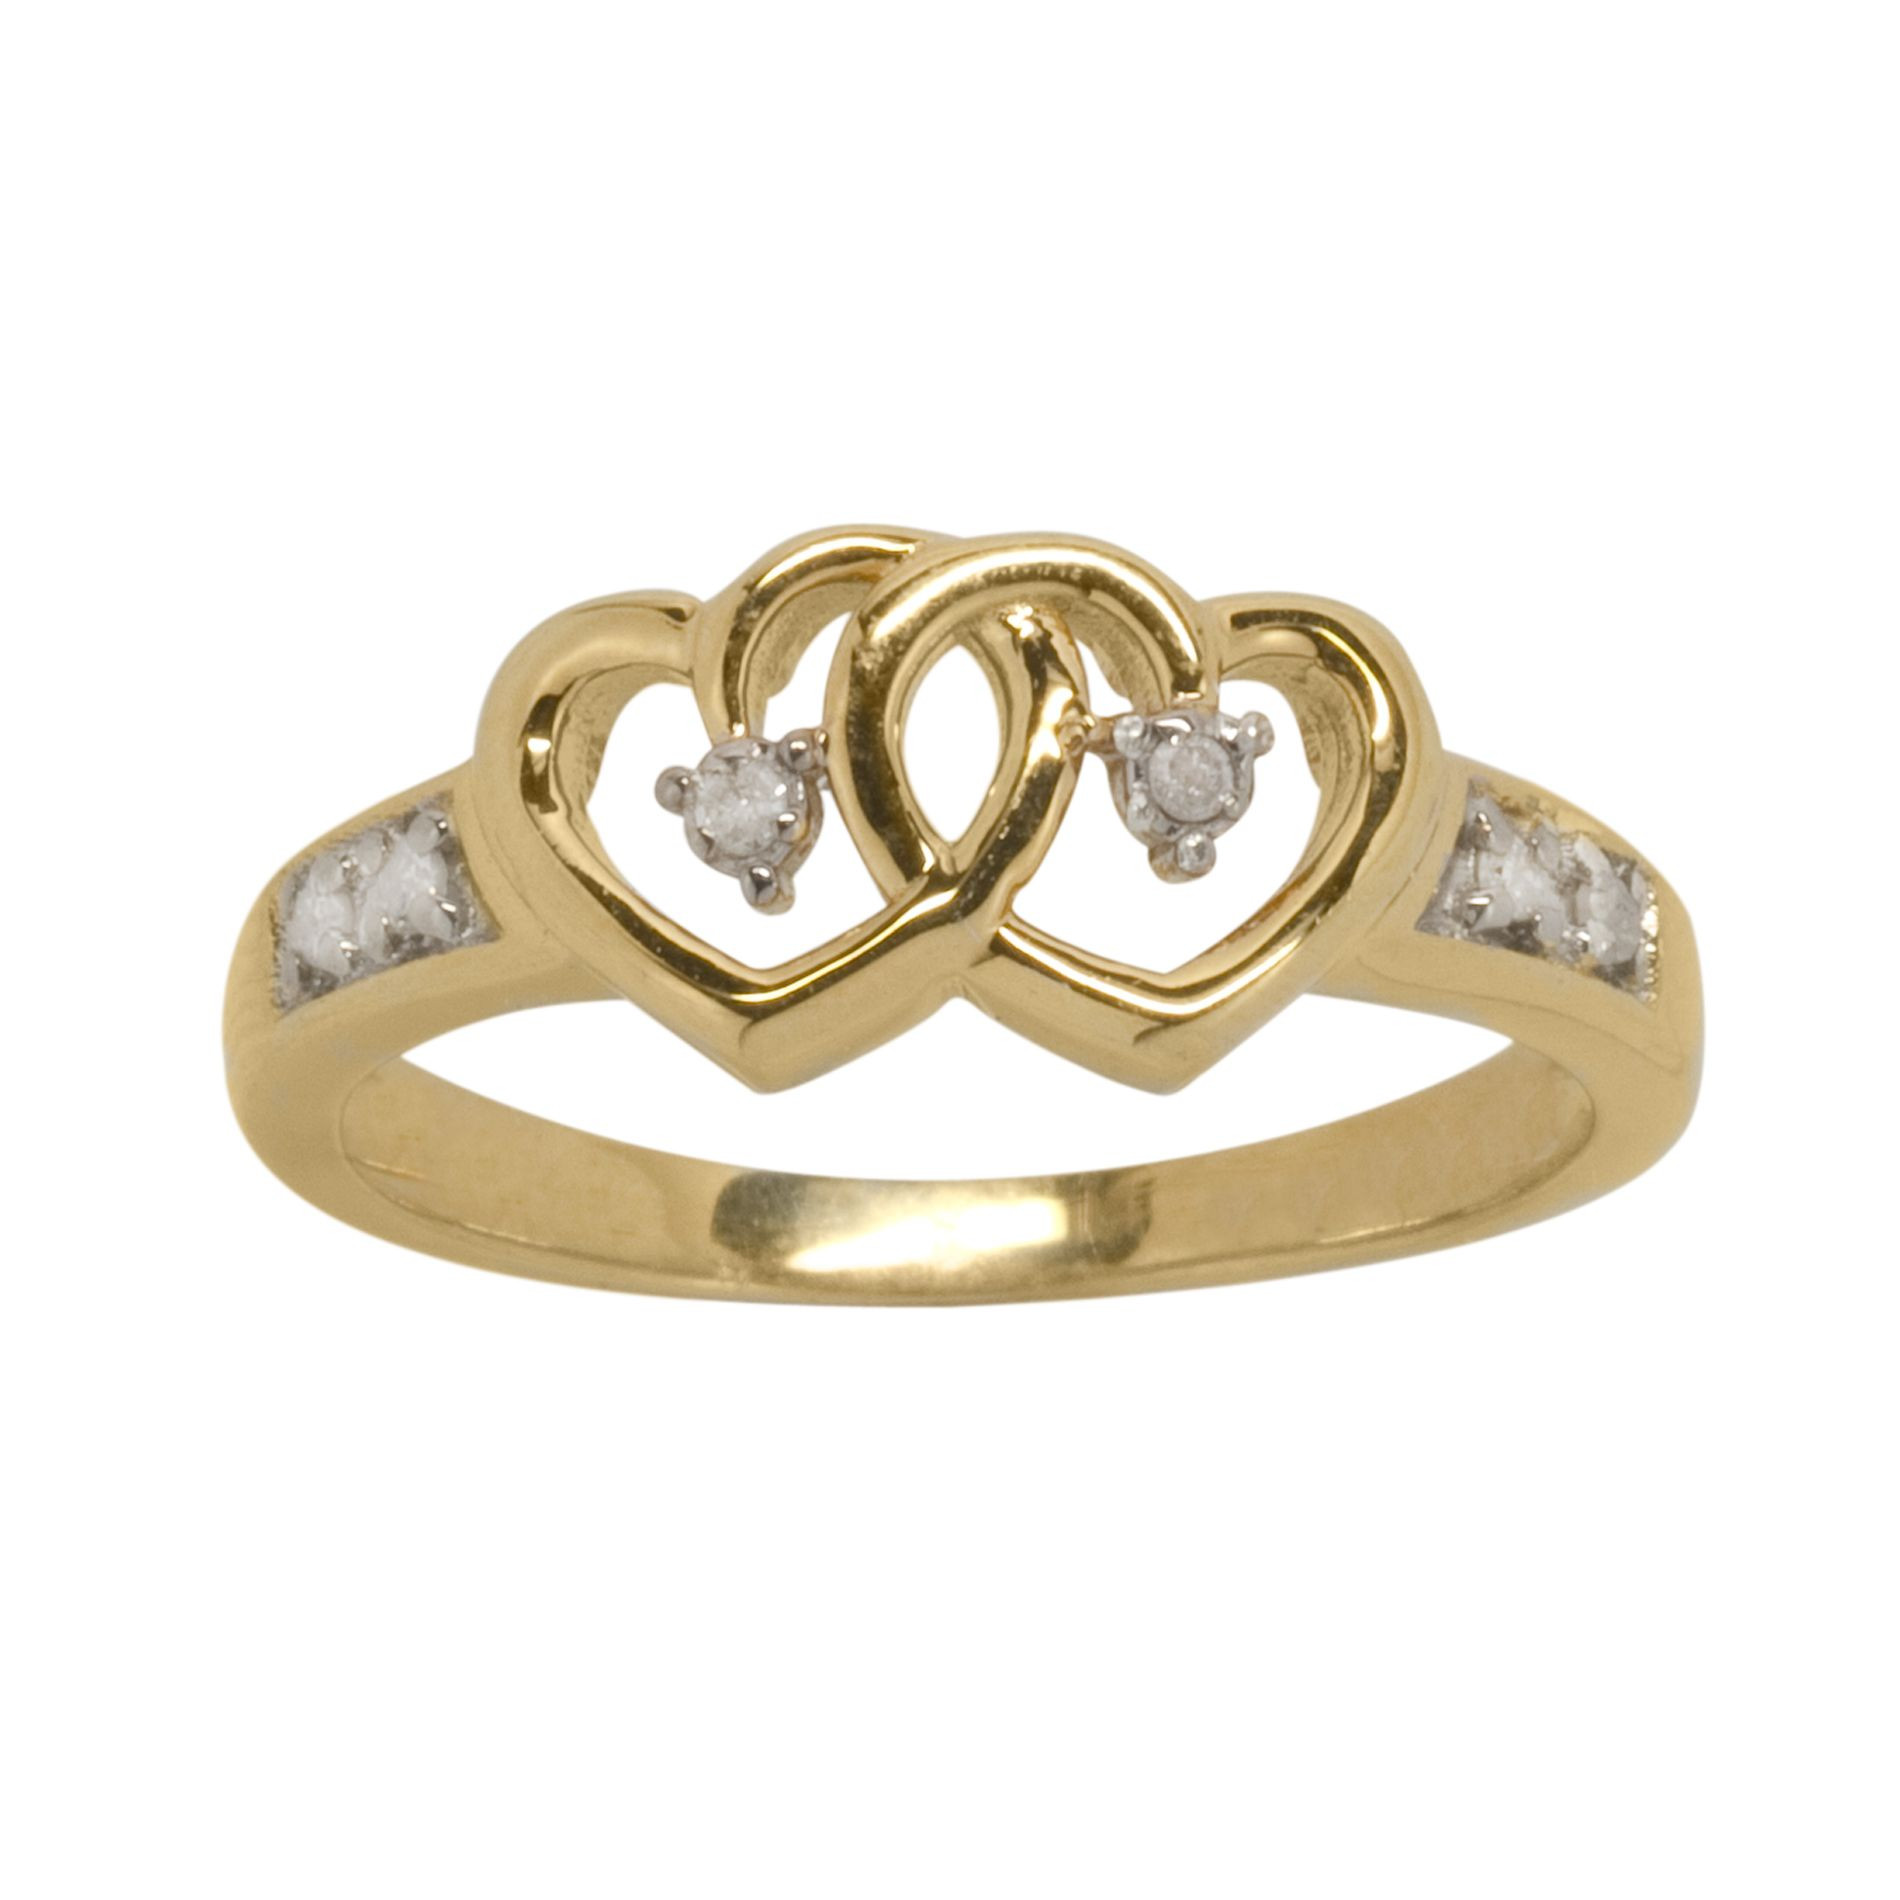 Diamond Heart Rings
 Diamond Accent Heart Ring in 14k Gold over Sterling silver